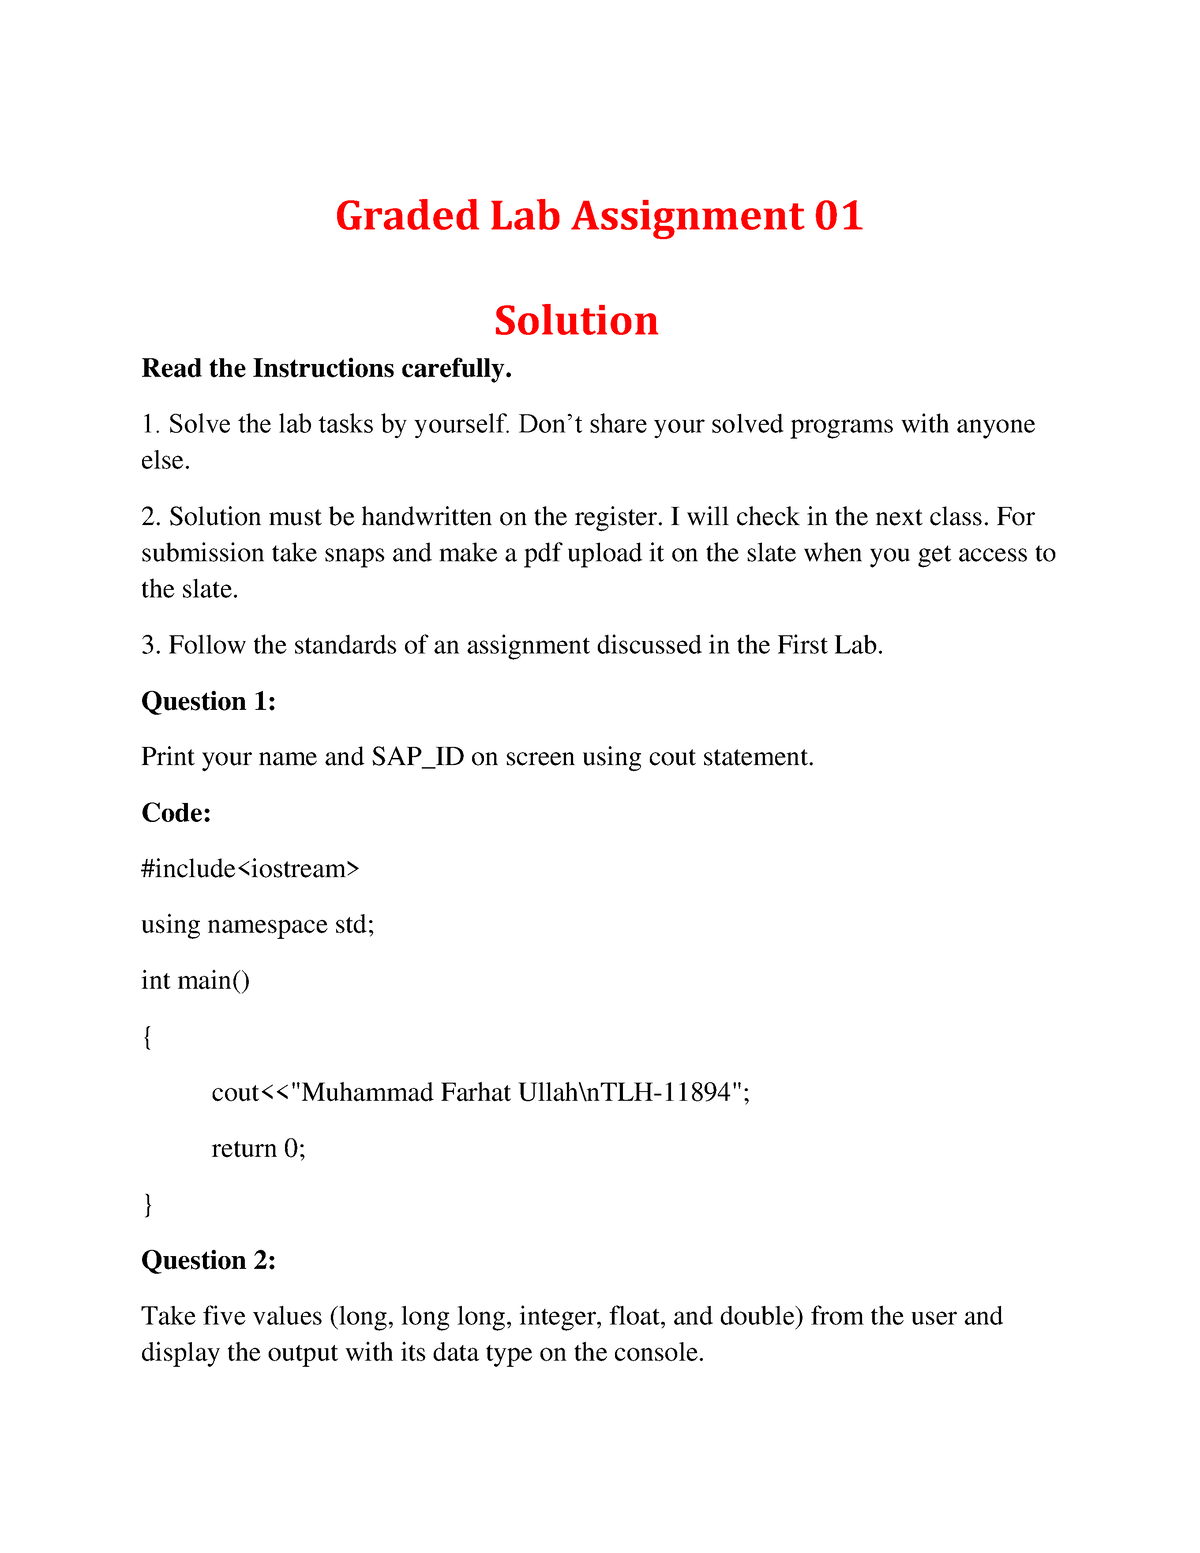 graded assignment lab report levers and pulleys